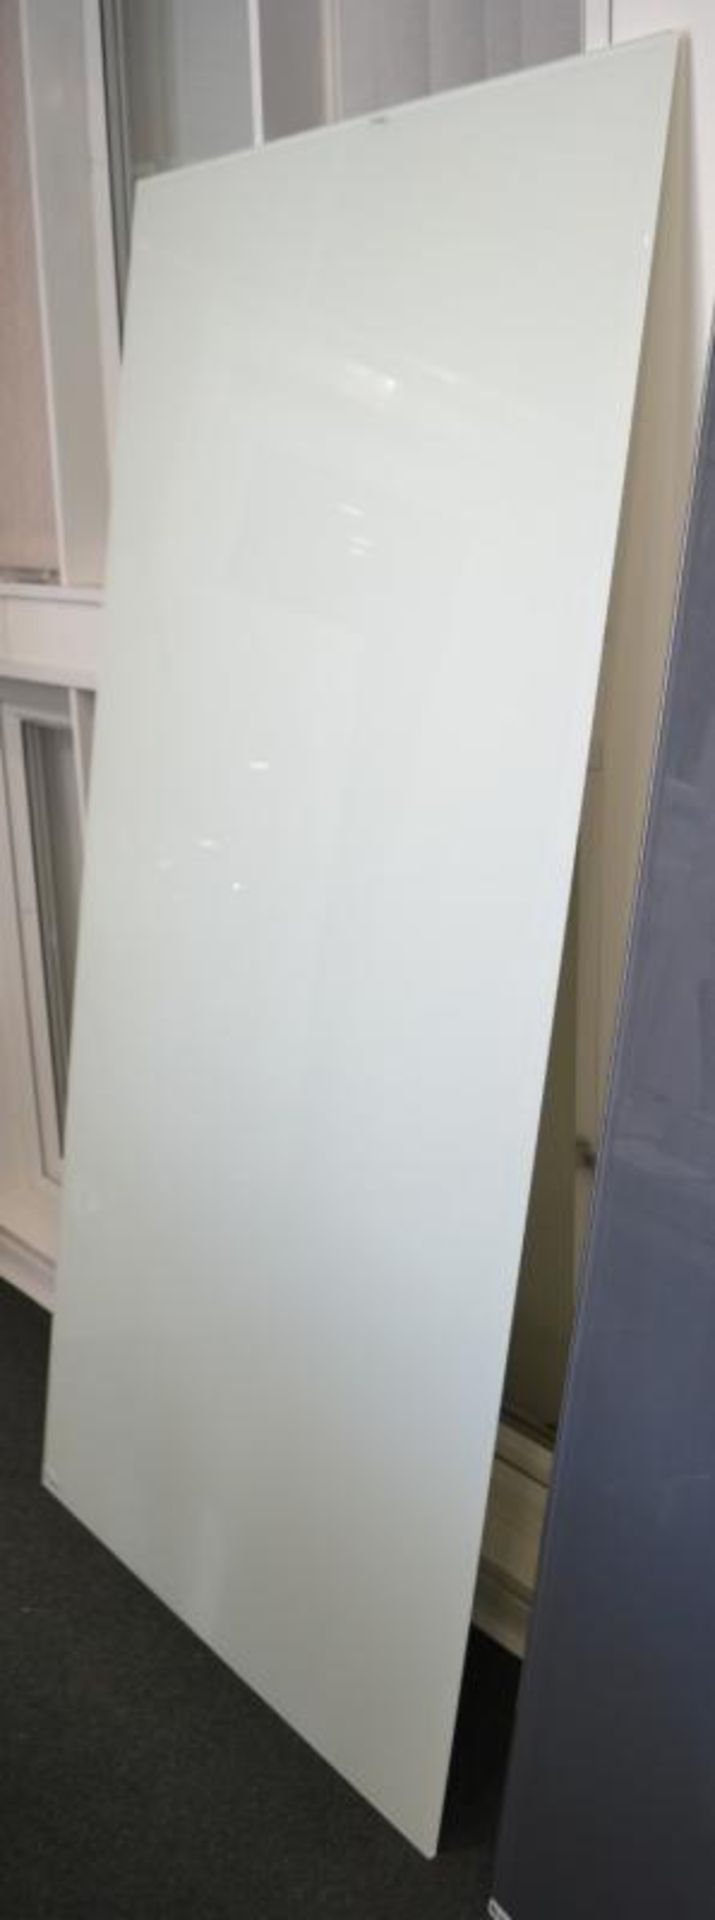 1 x White Tempered Table Top. This item is straight out of the showroom and is in very good conditio